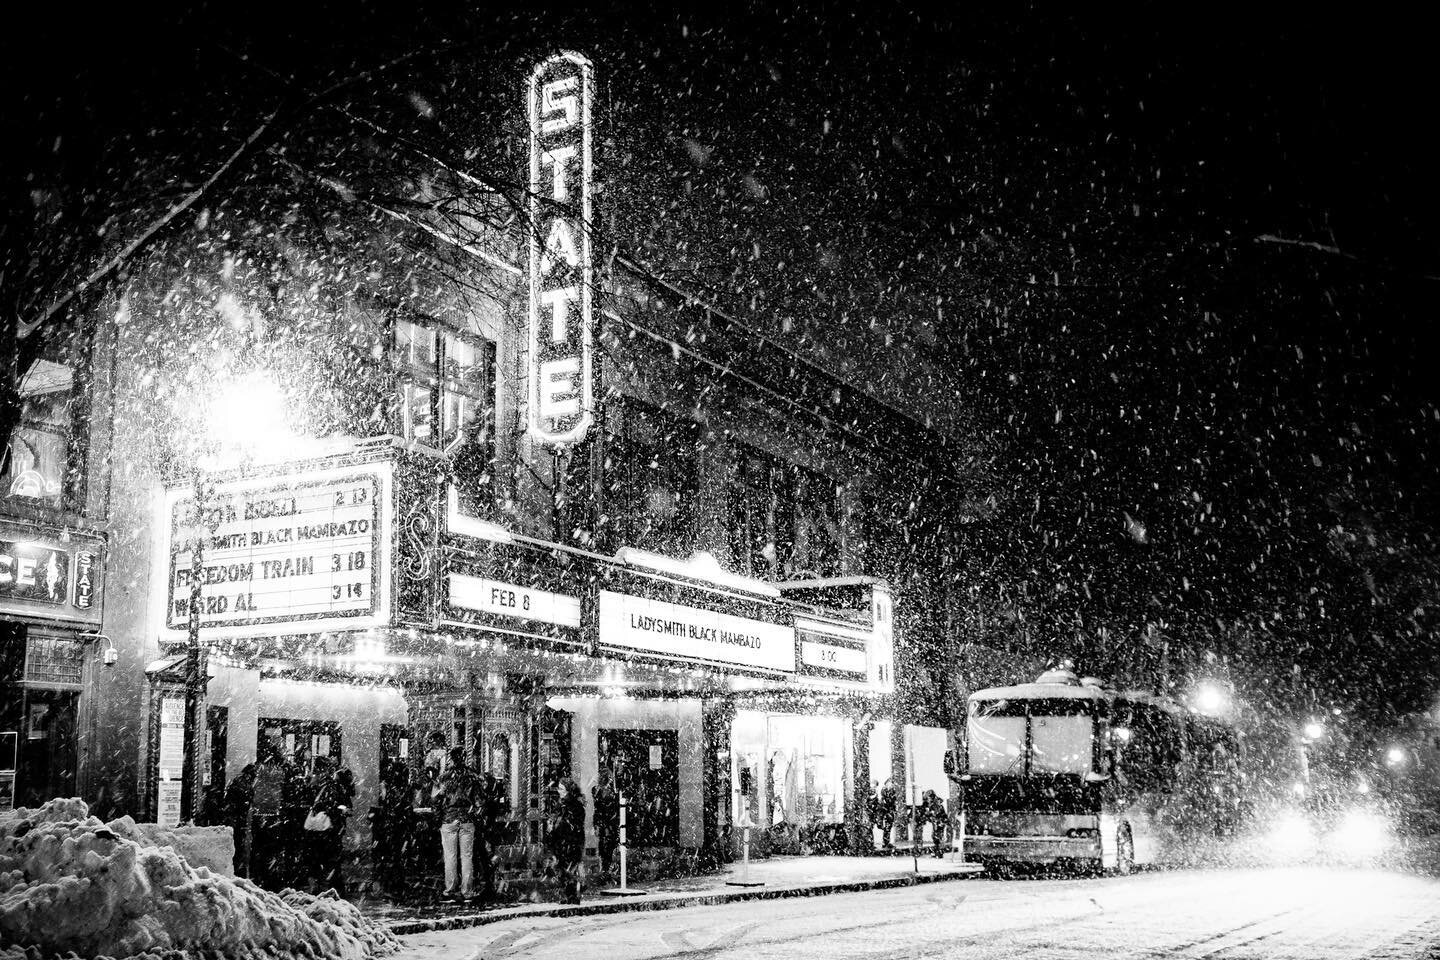 The marquee shines a bit brighter during a good snowstorm, don't you think? Bring it on winter!

Tonight, the marquee isn't shining, but with your help, it will! Help us brighten up cold @downtownithaca winter nights again by Saving Your Seat! Link I